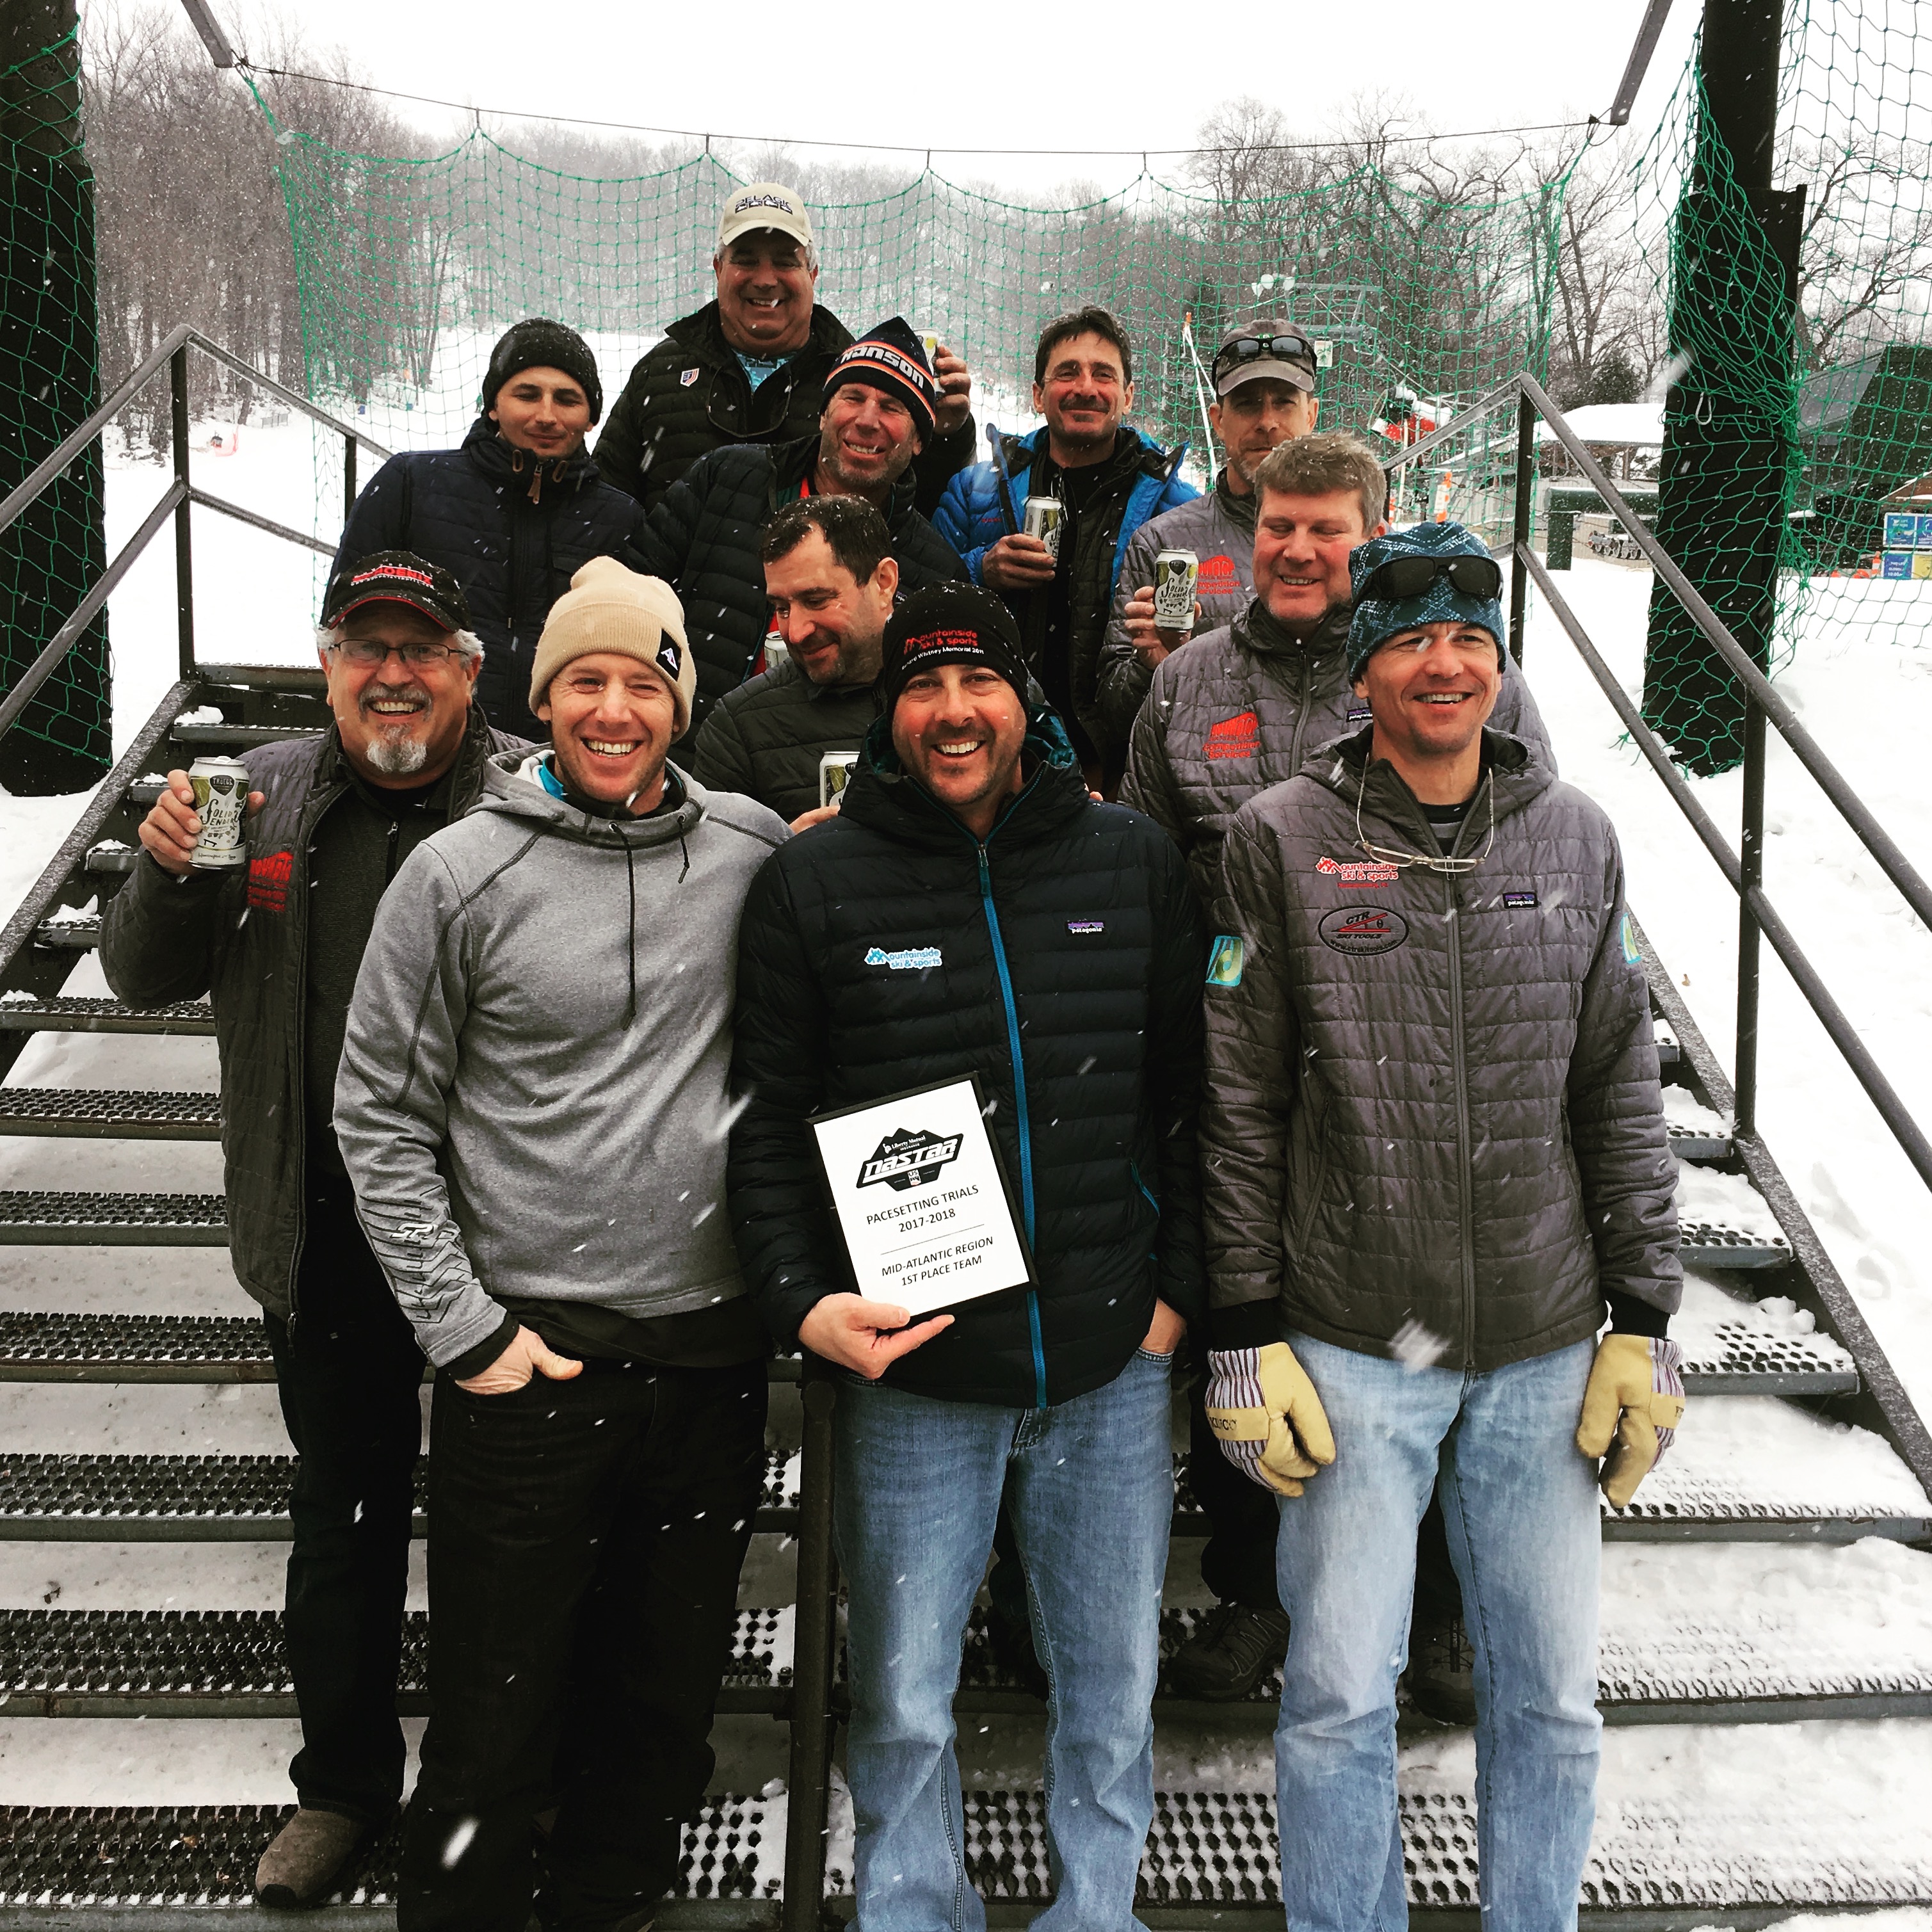 Team Roundtop won the Race of Champions at Roundtop